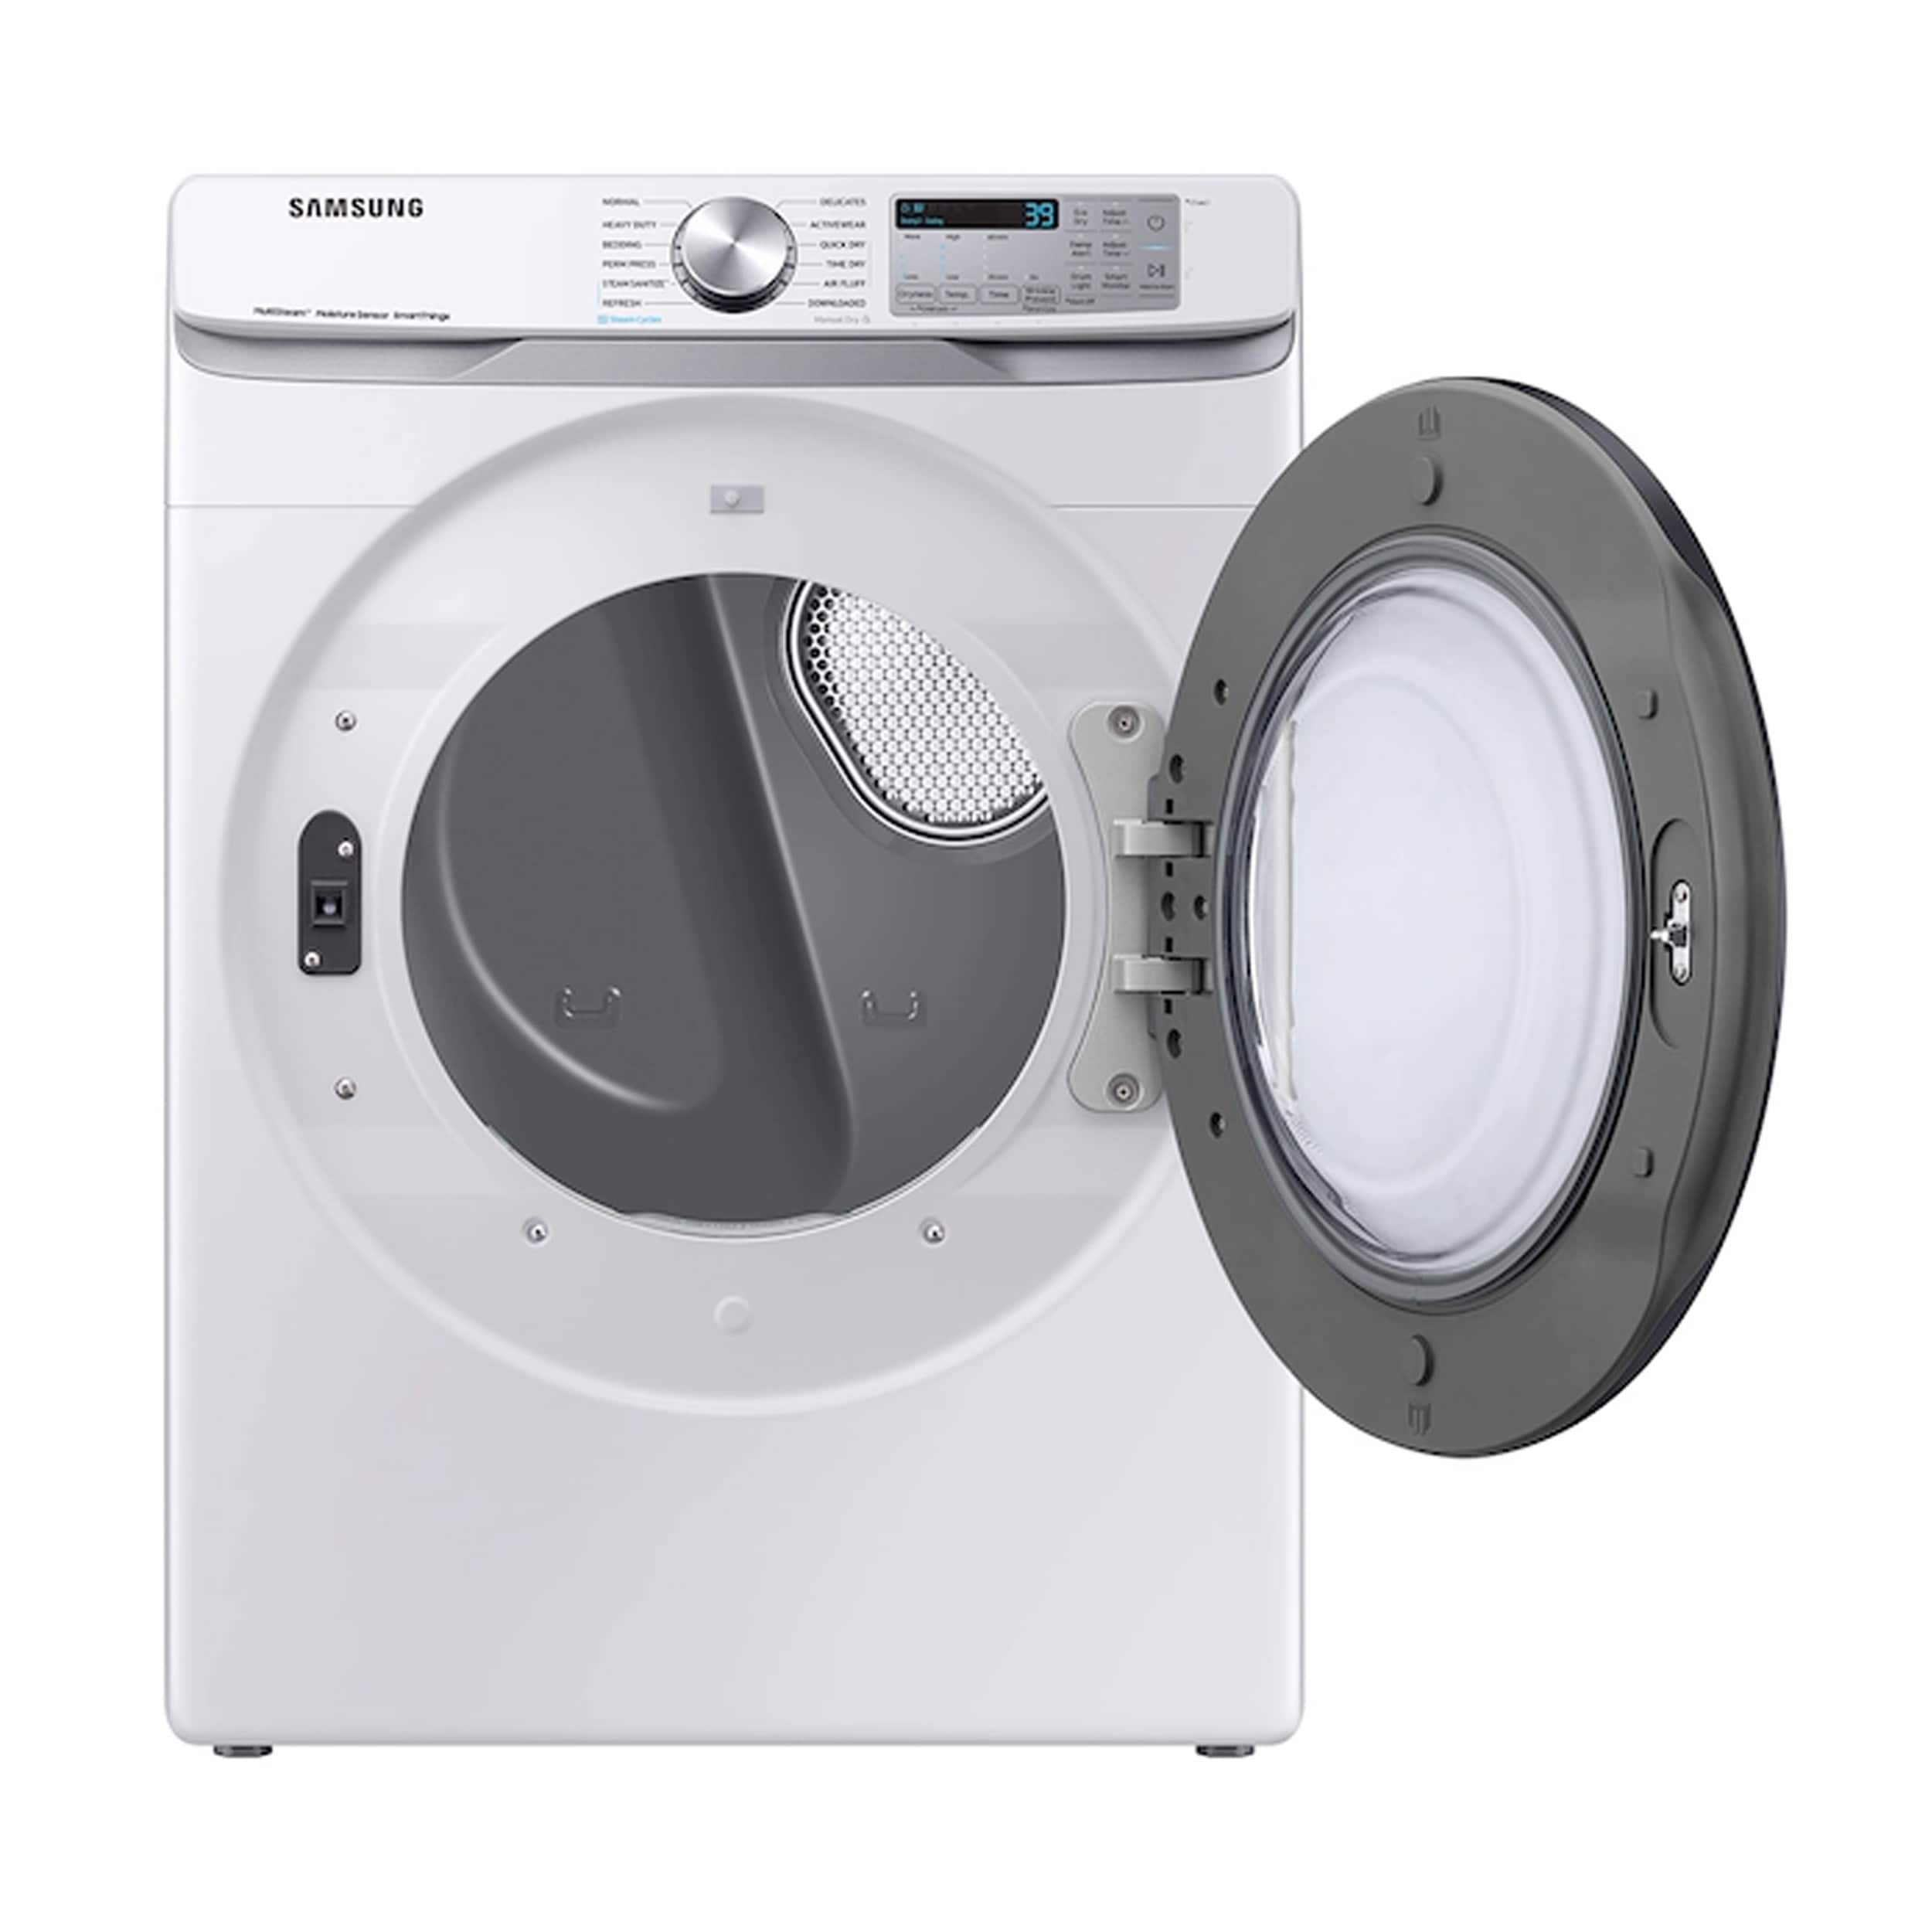 Samsung 7.5 cu. ft. Smart Electric Dryer with Stea...